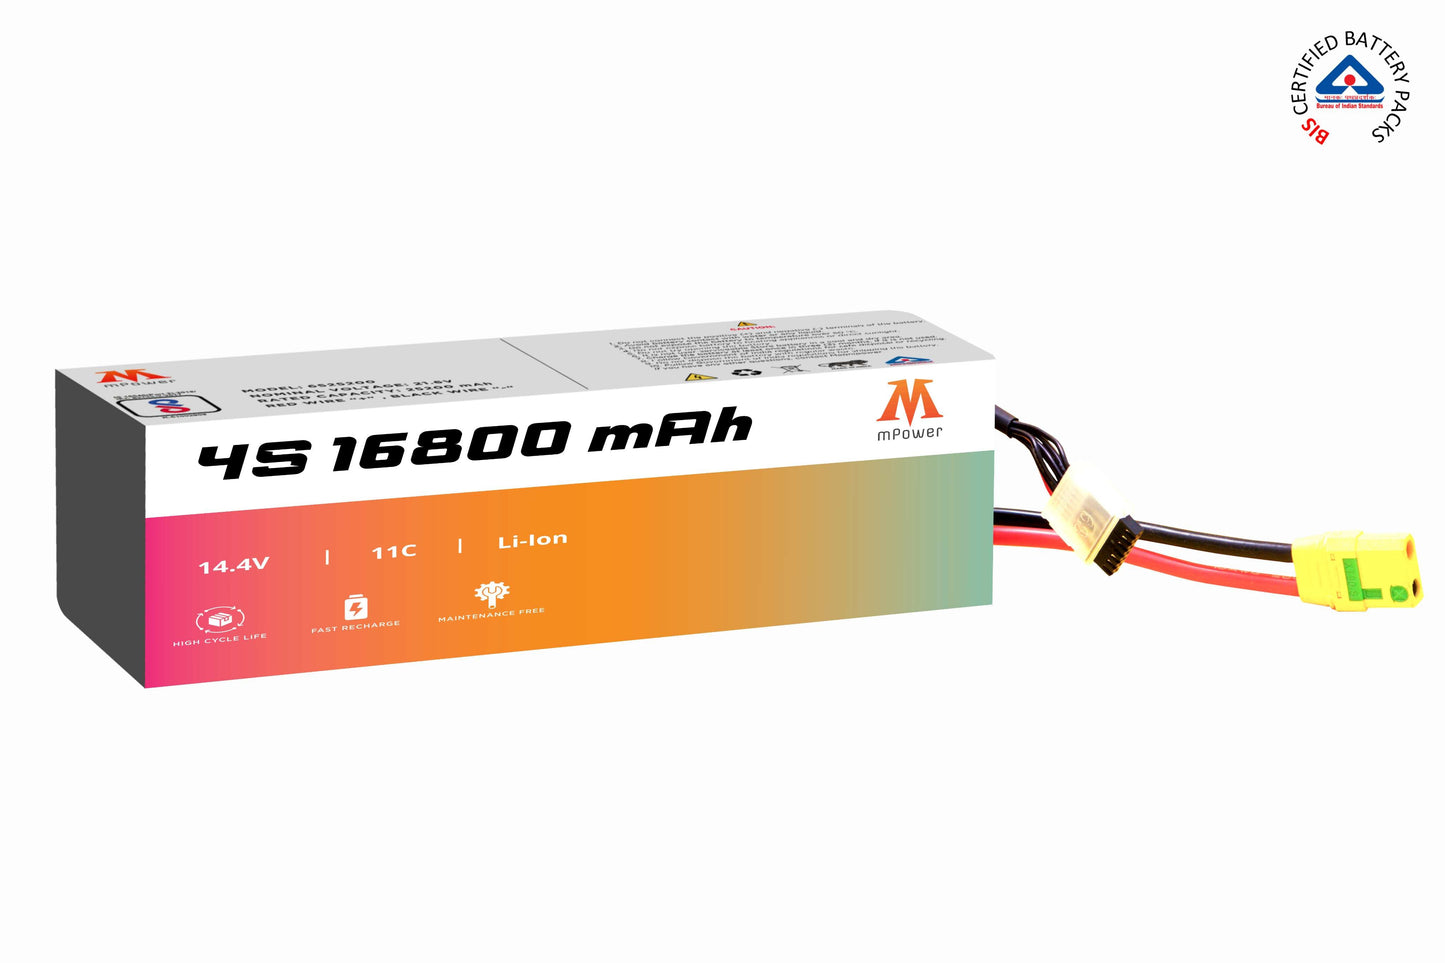 mPower 4S 16800mAh Lithium-Ion Battery for Surveillance Drones